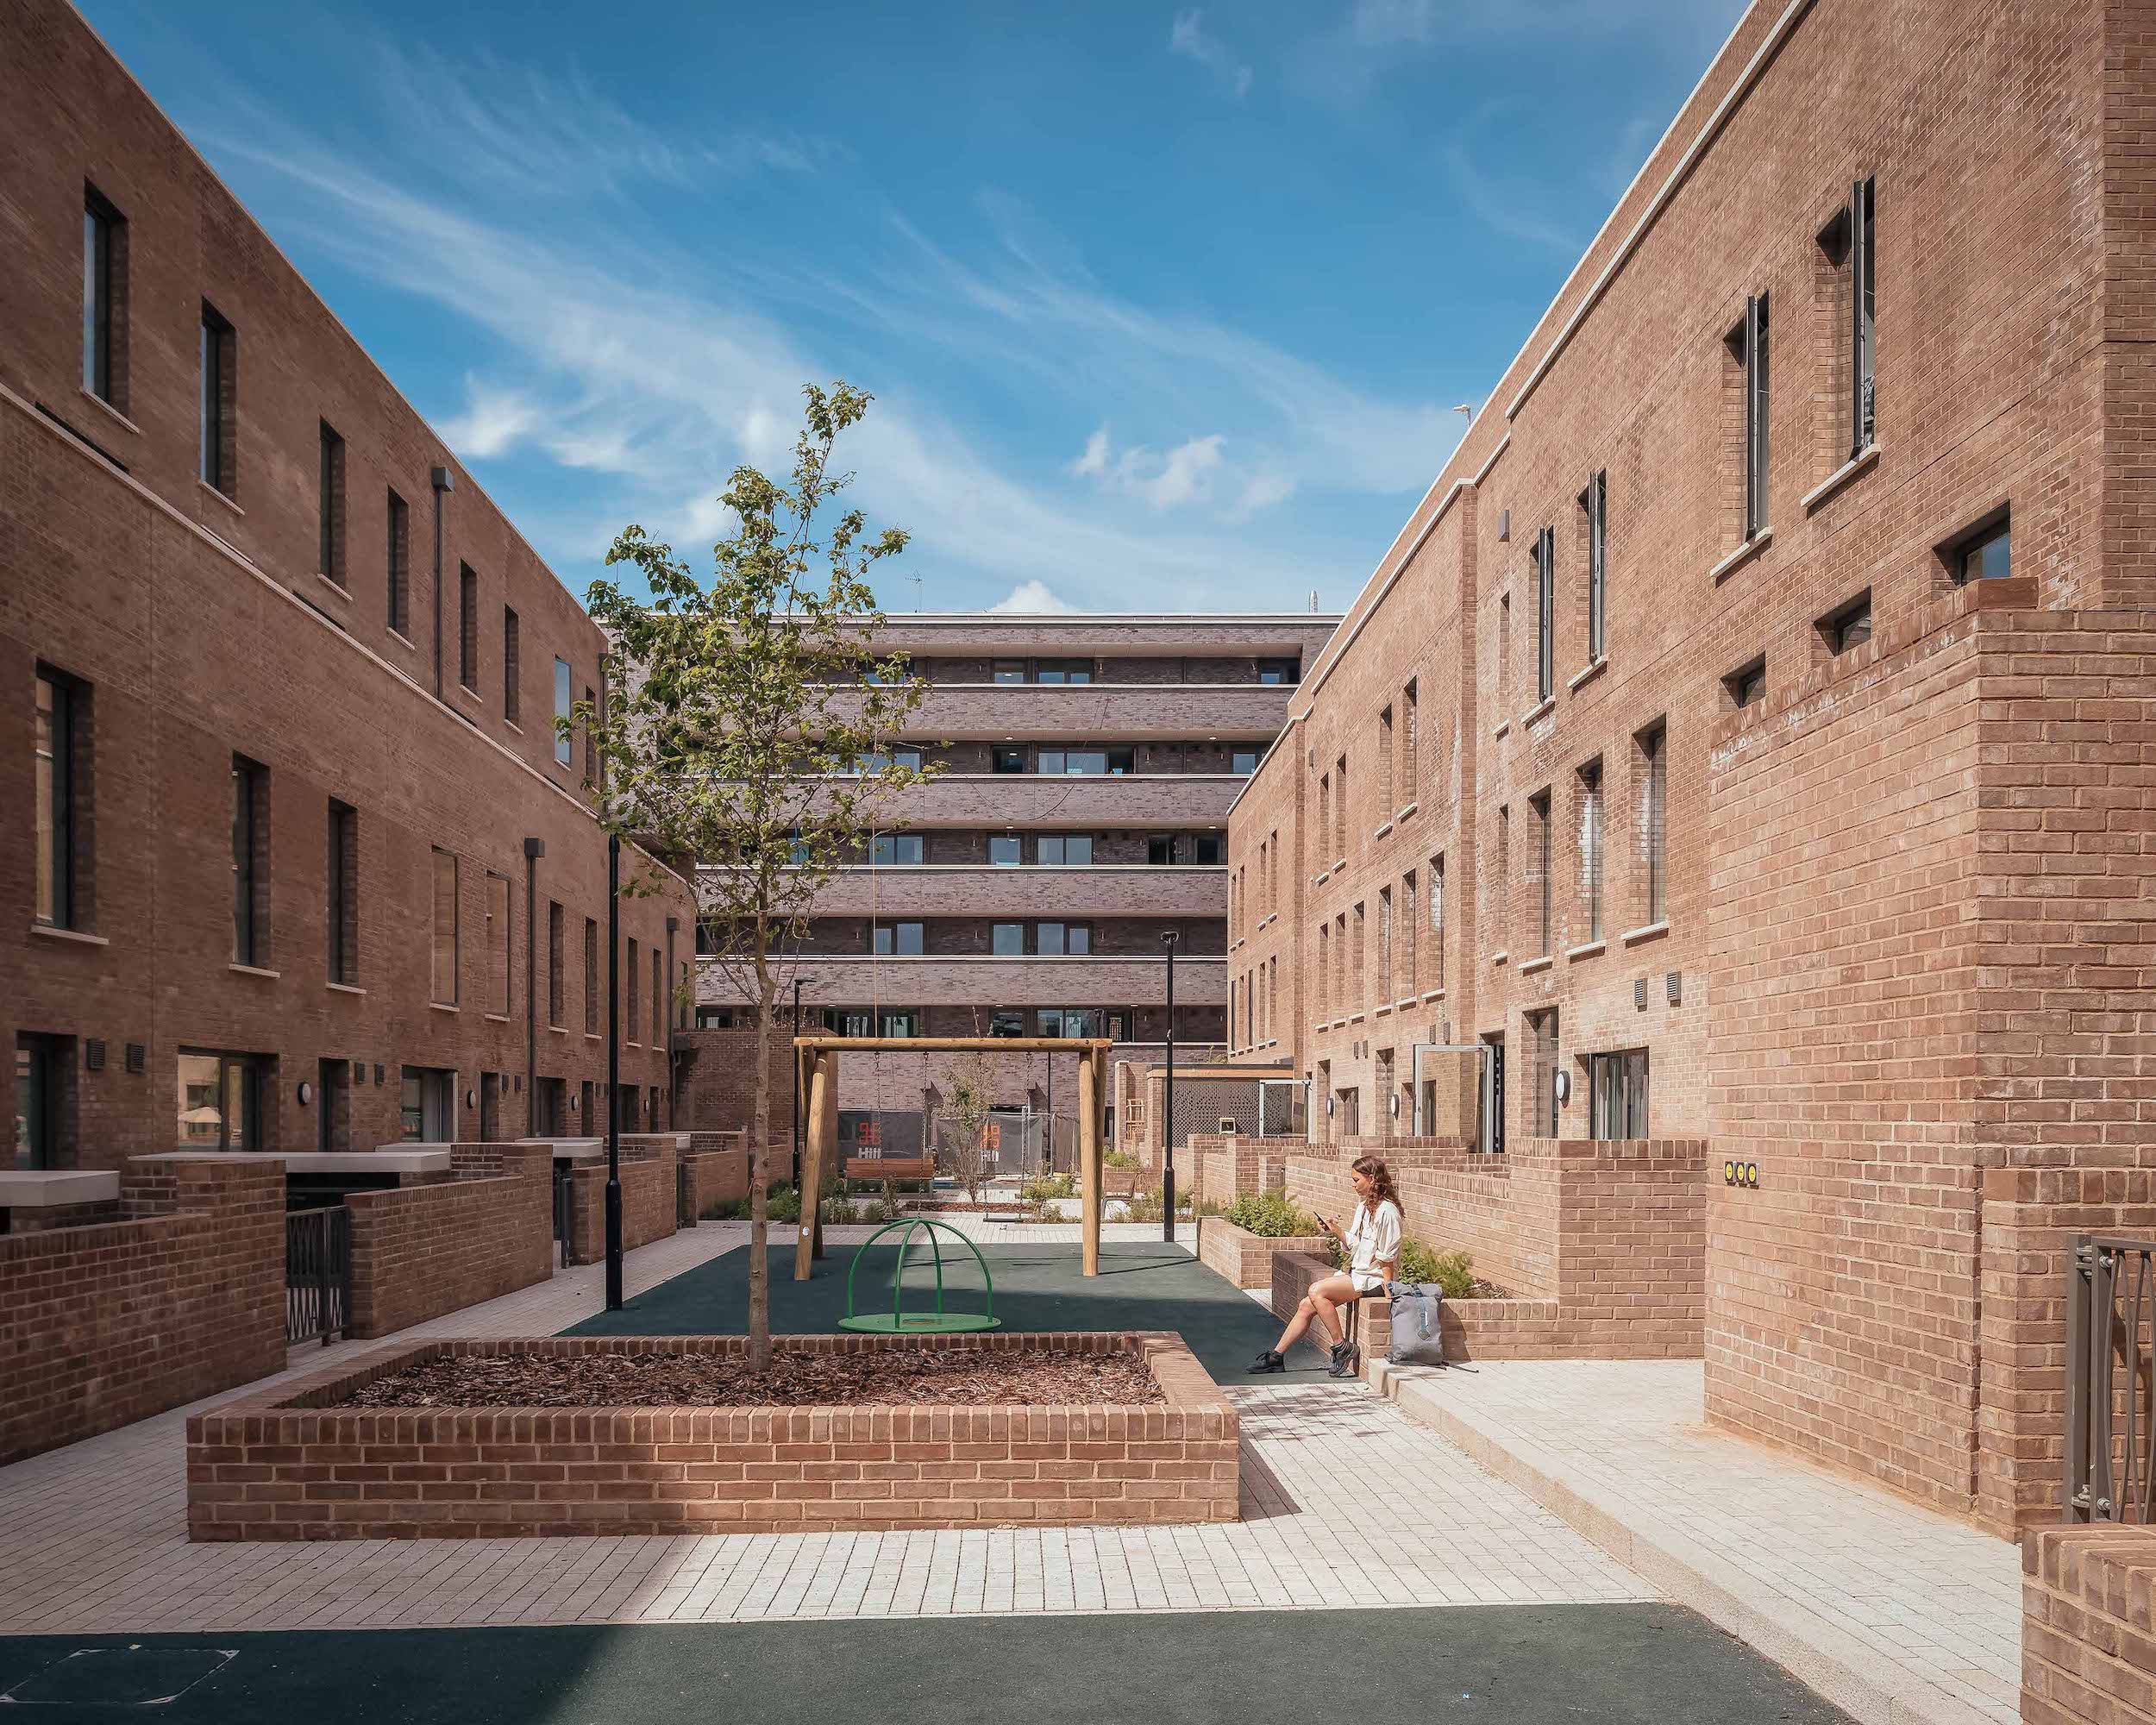 Residents communal courtyard in Phase 1b is safely overlooked